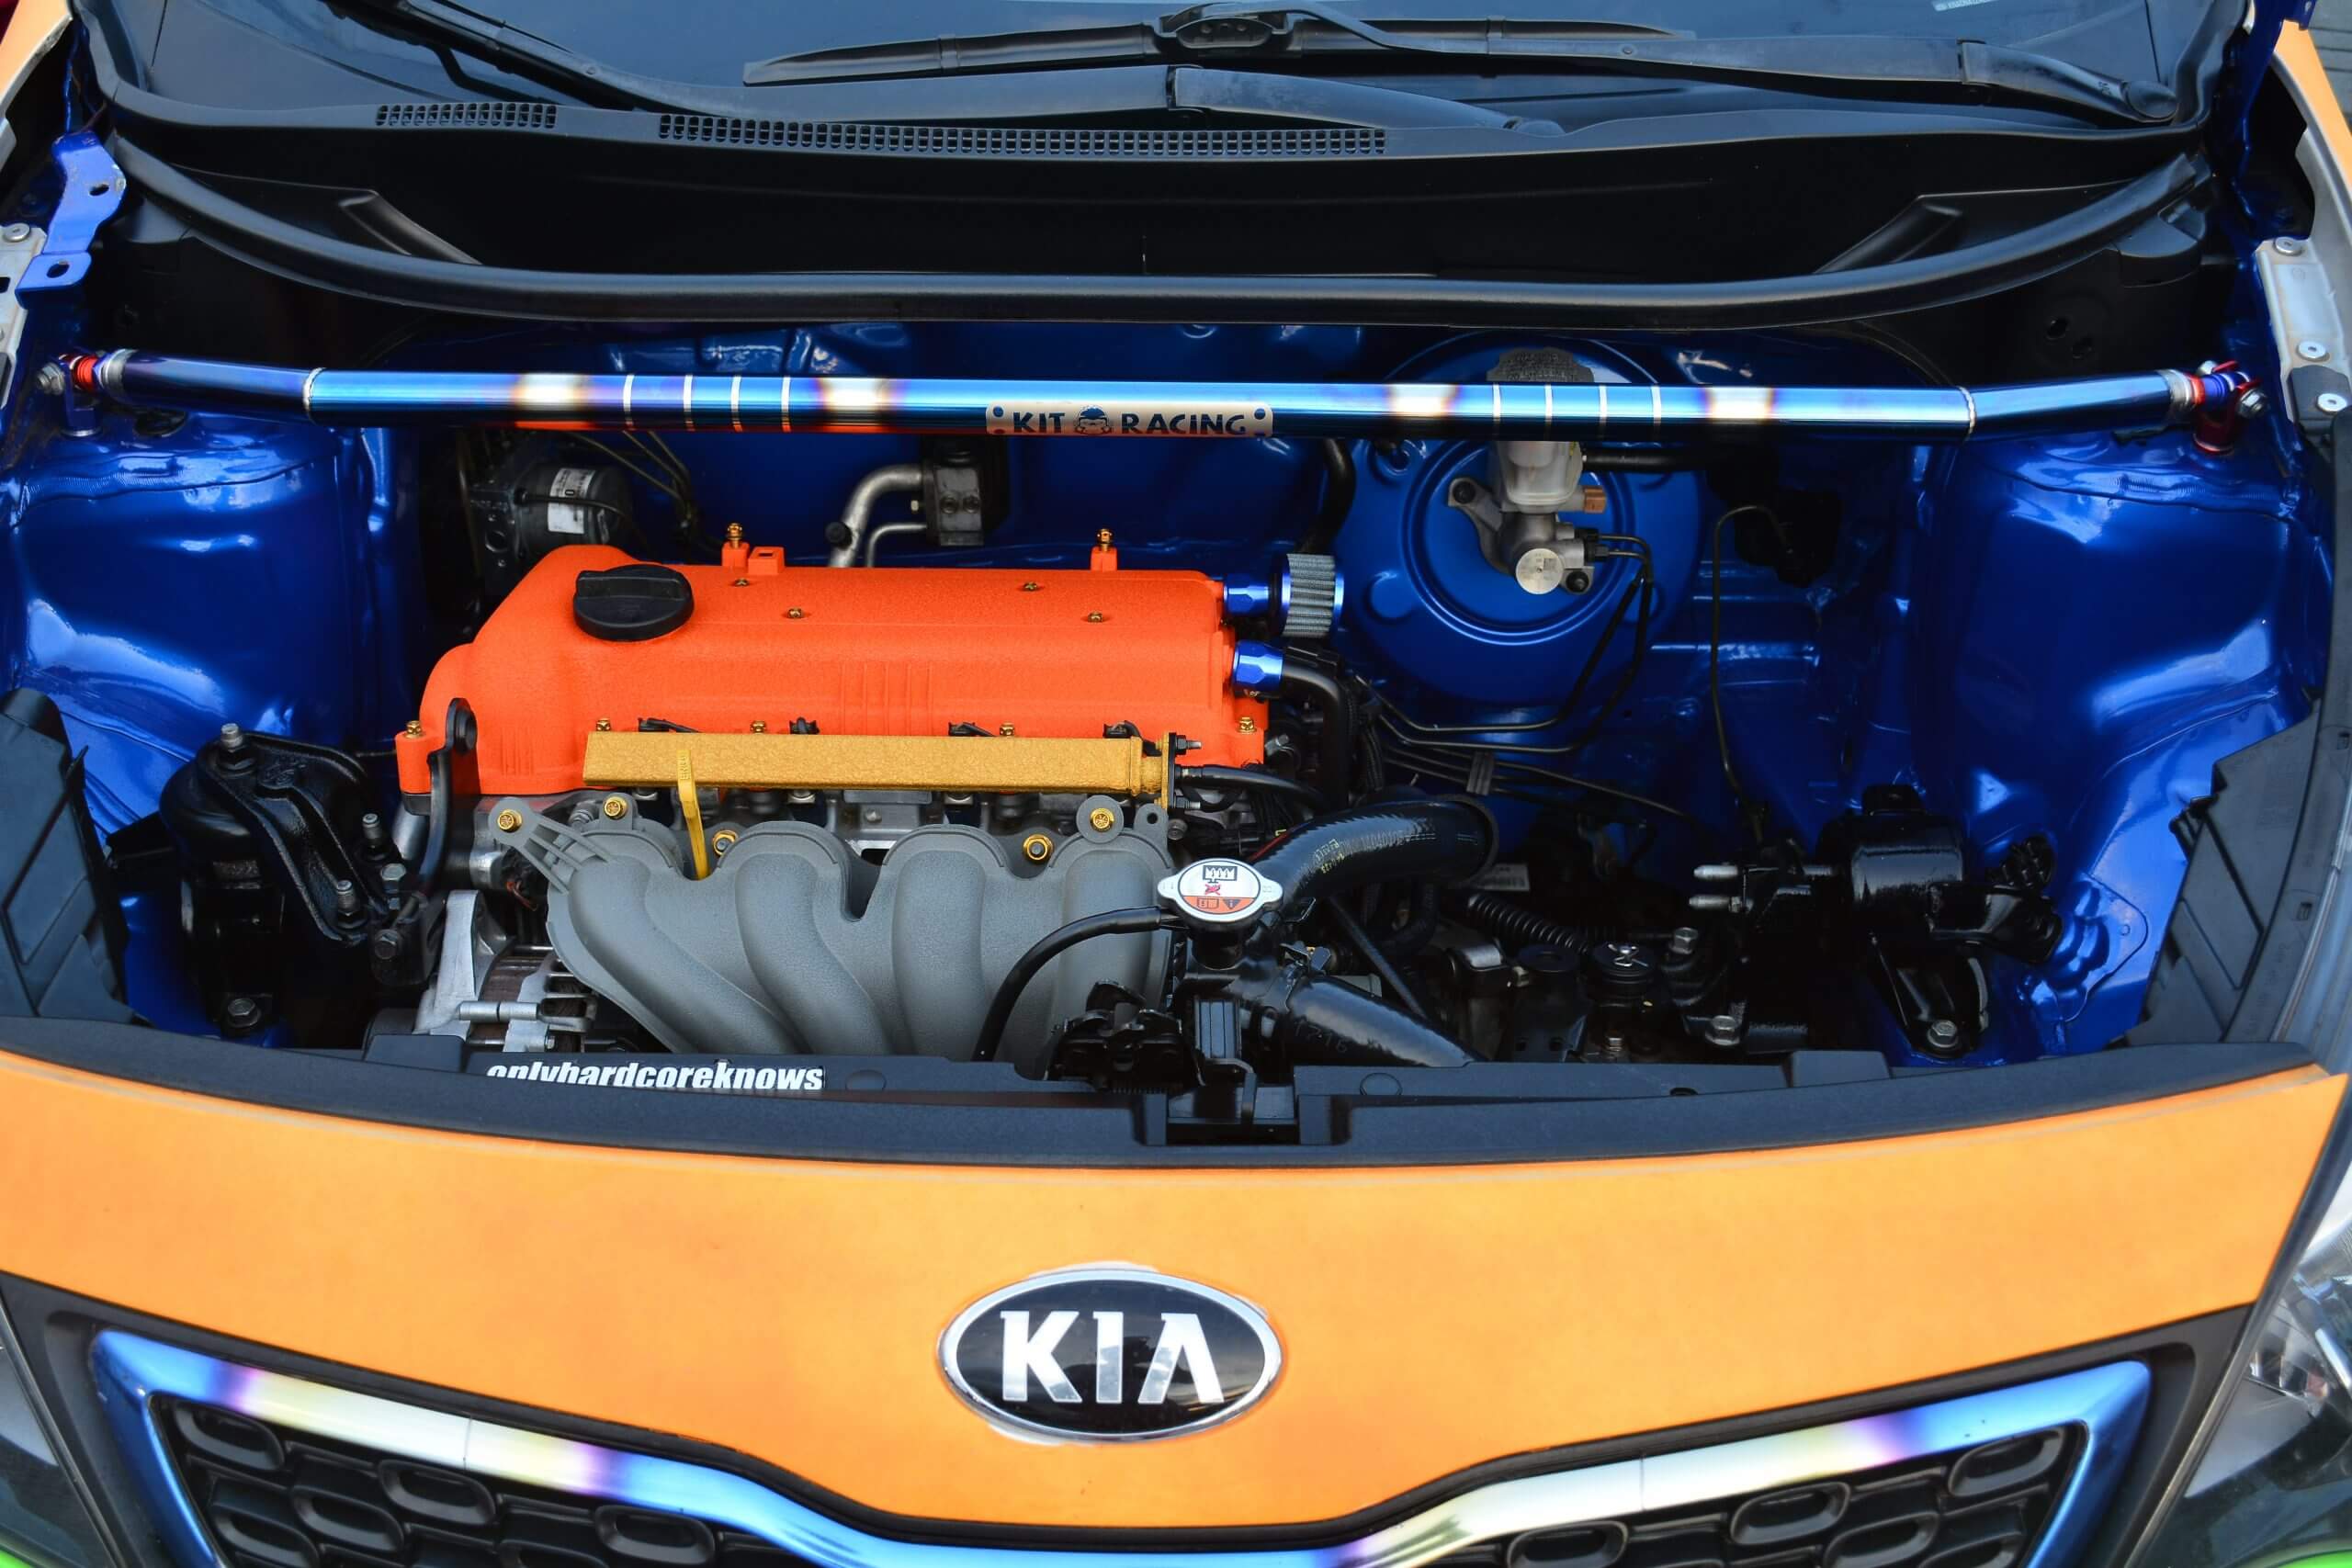 PASAY, PH - DEC. 7: Kia car engine at Bumper to Bumper 15 car show on December 7, 2019 in Mall of Asia Concert Grounds, Pasay, Philippines.